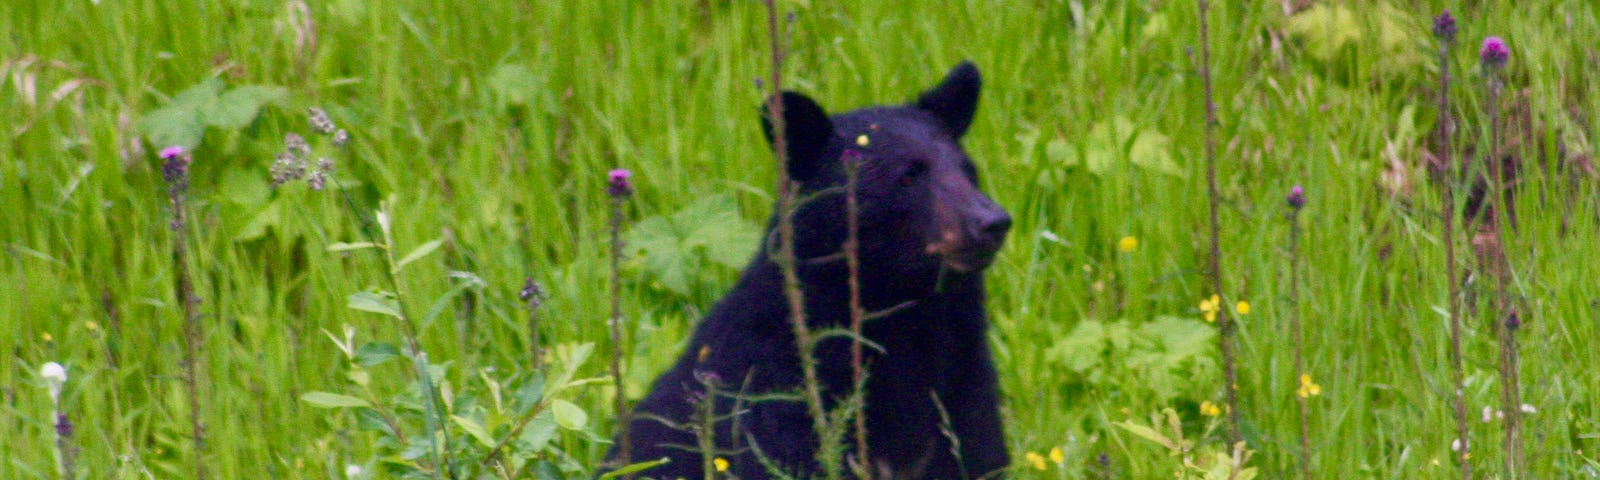 A photo of a small black bear sitting in some fresh green grass